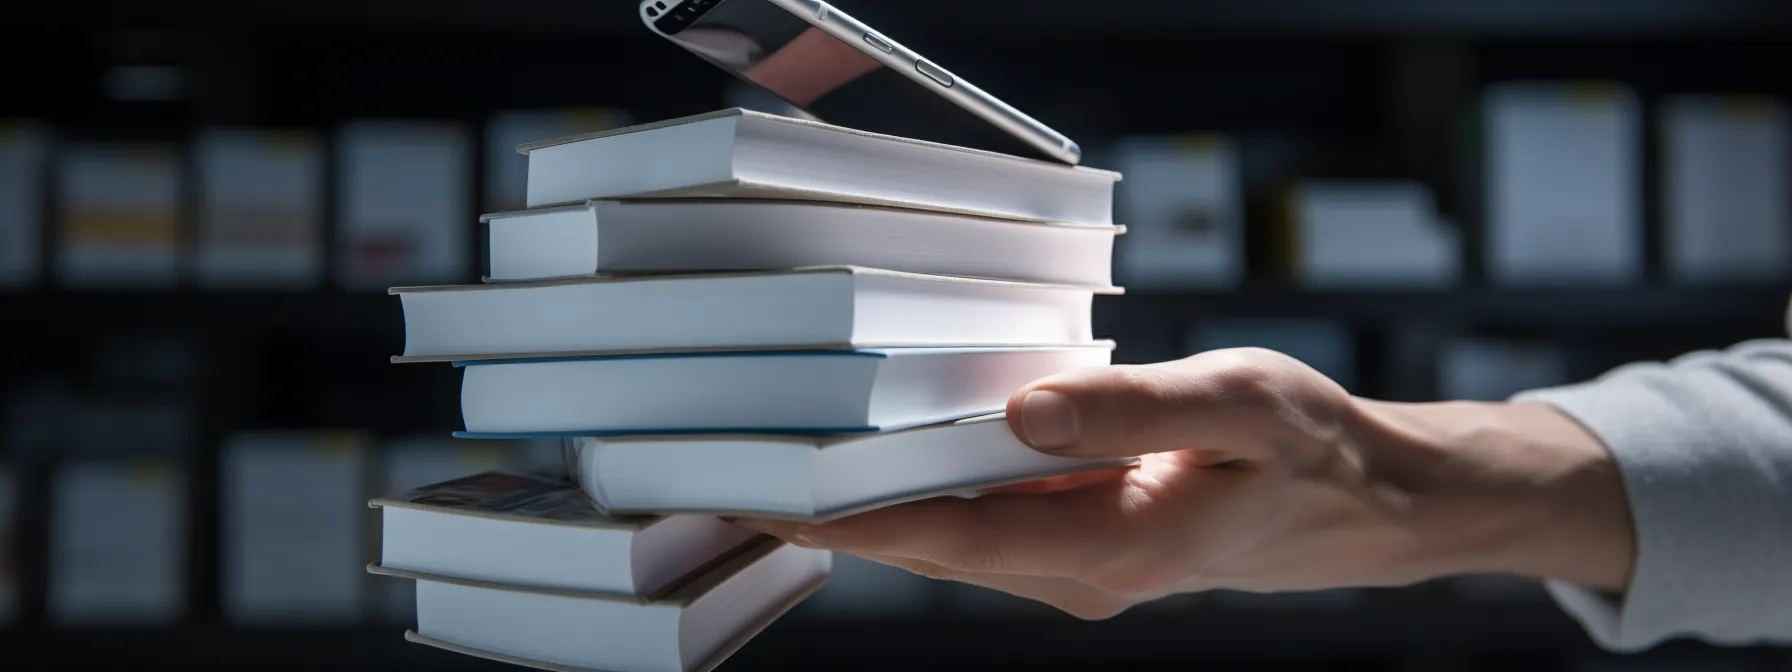 a person holding a stack of seo books with a mobile phone camera pointed towards them.